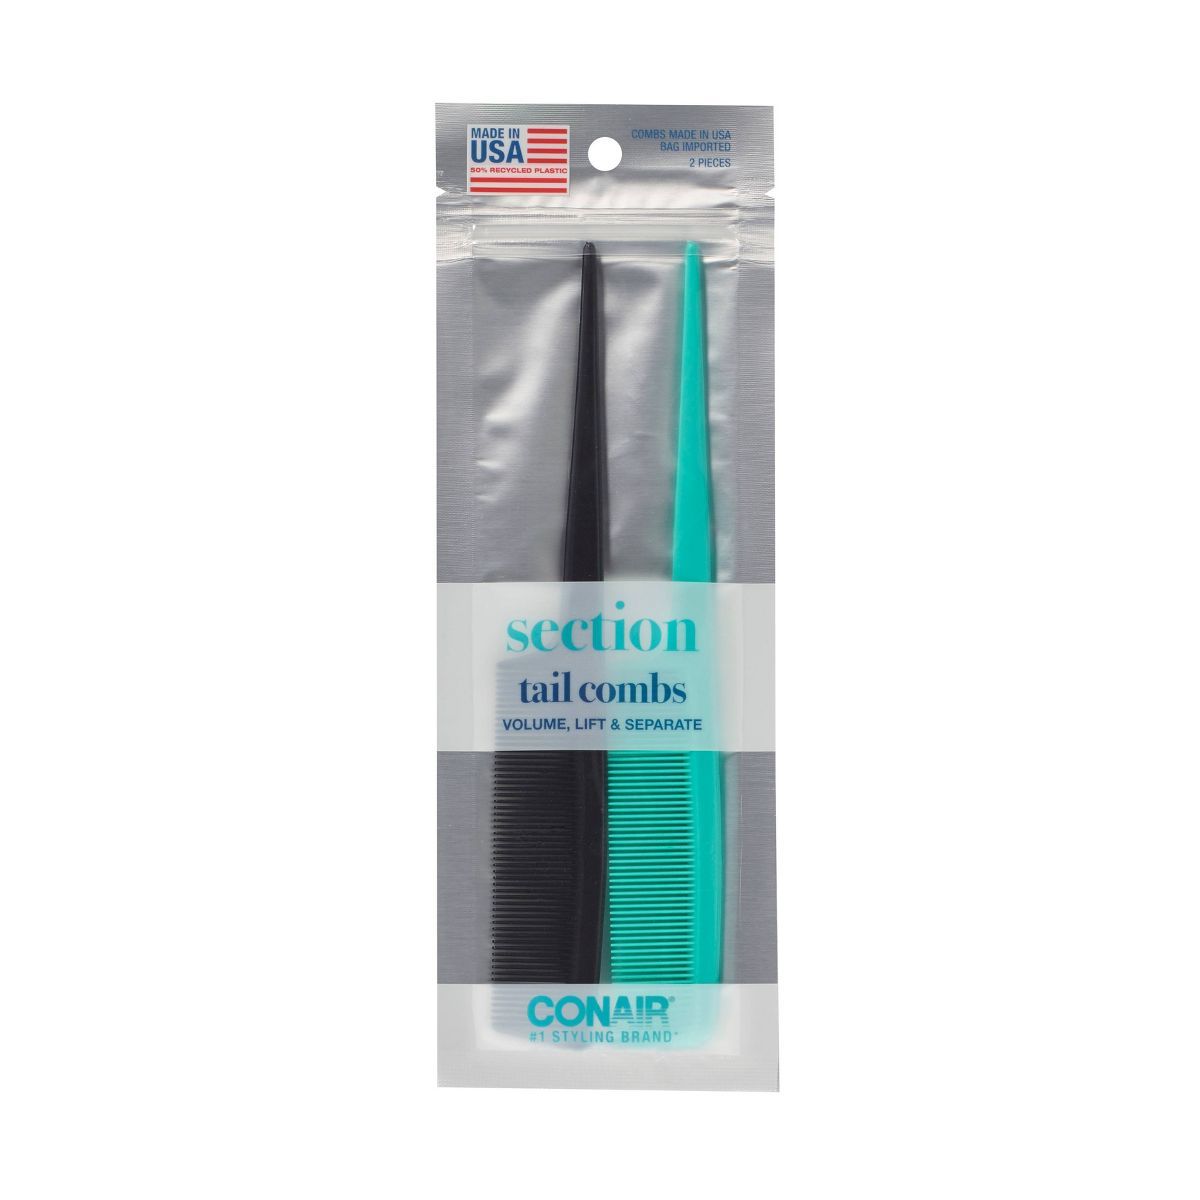 Conair Volume, Lift, and Separate Fine-Tooth Tail Combs - Black/Teal - 2pk | Target